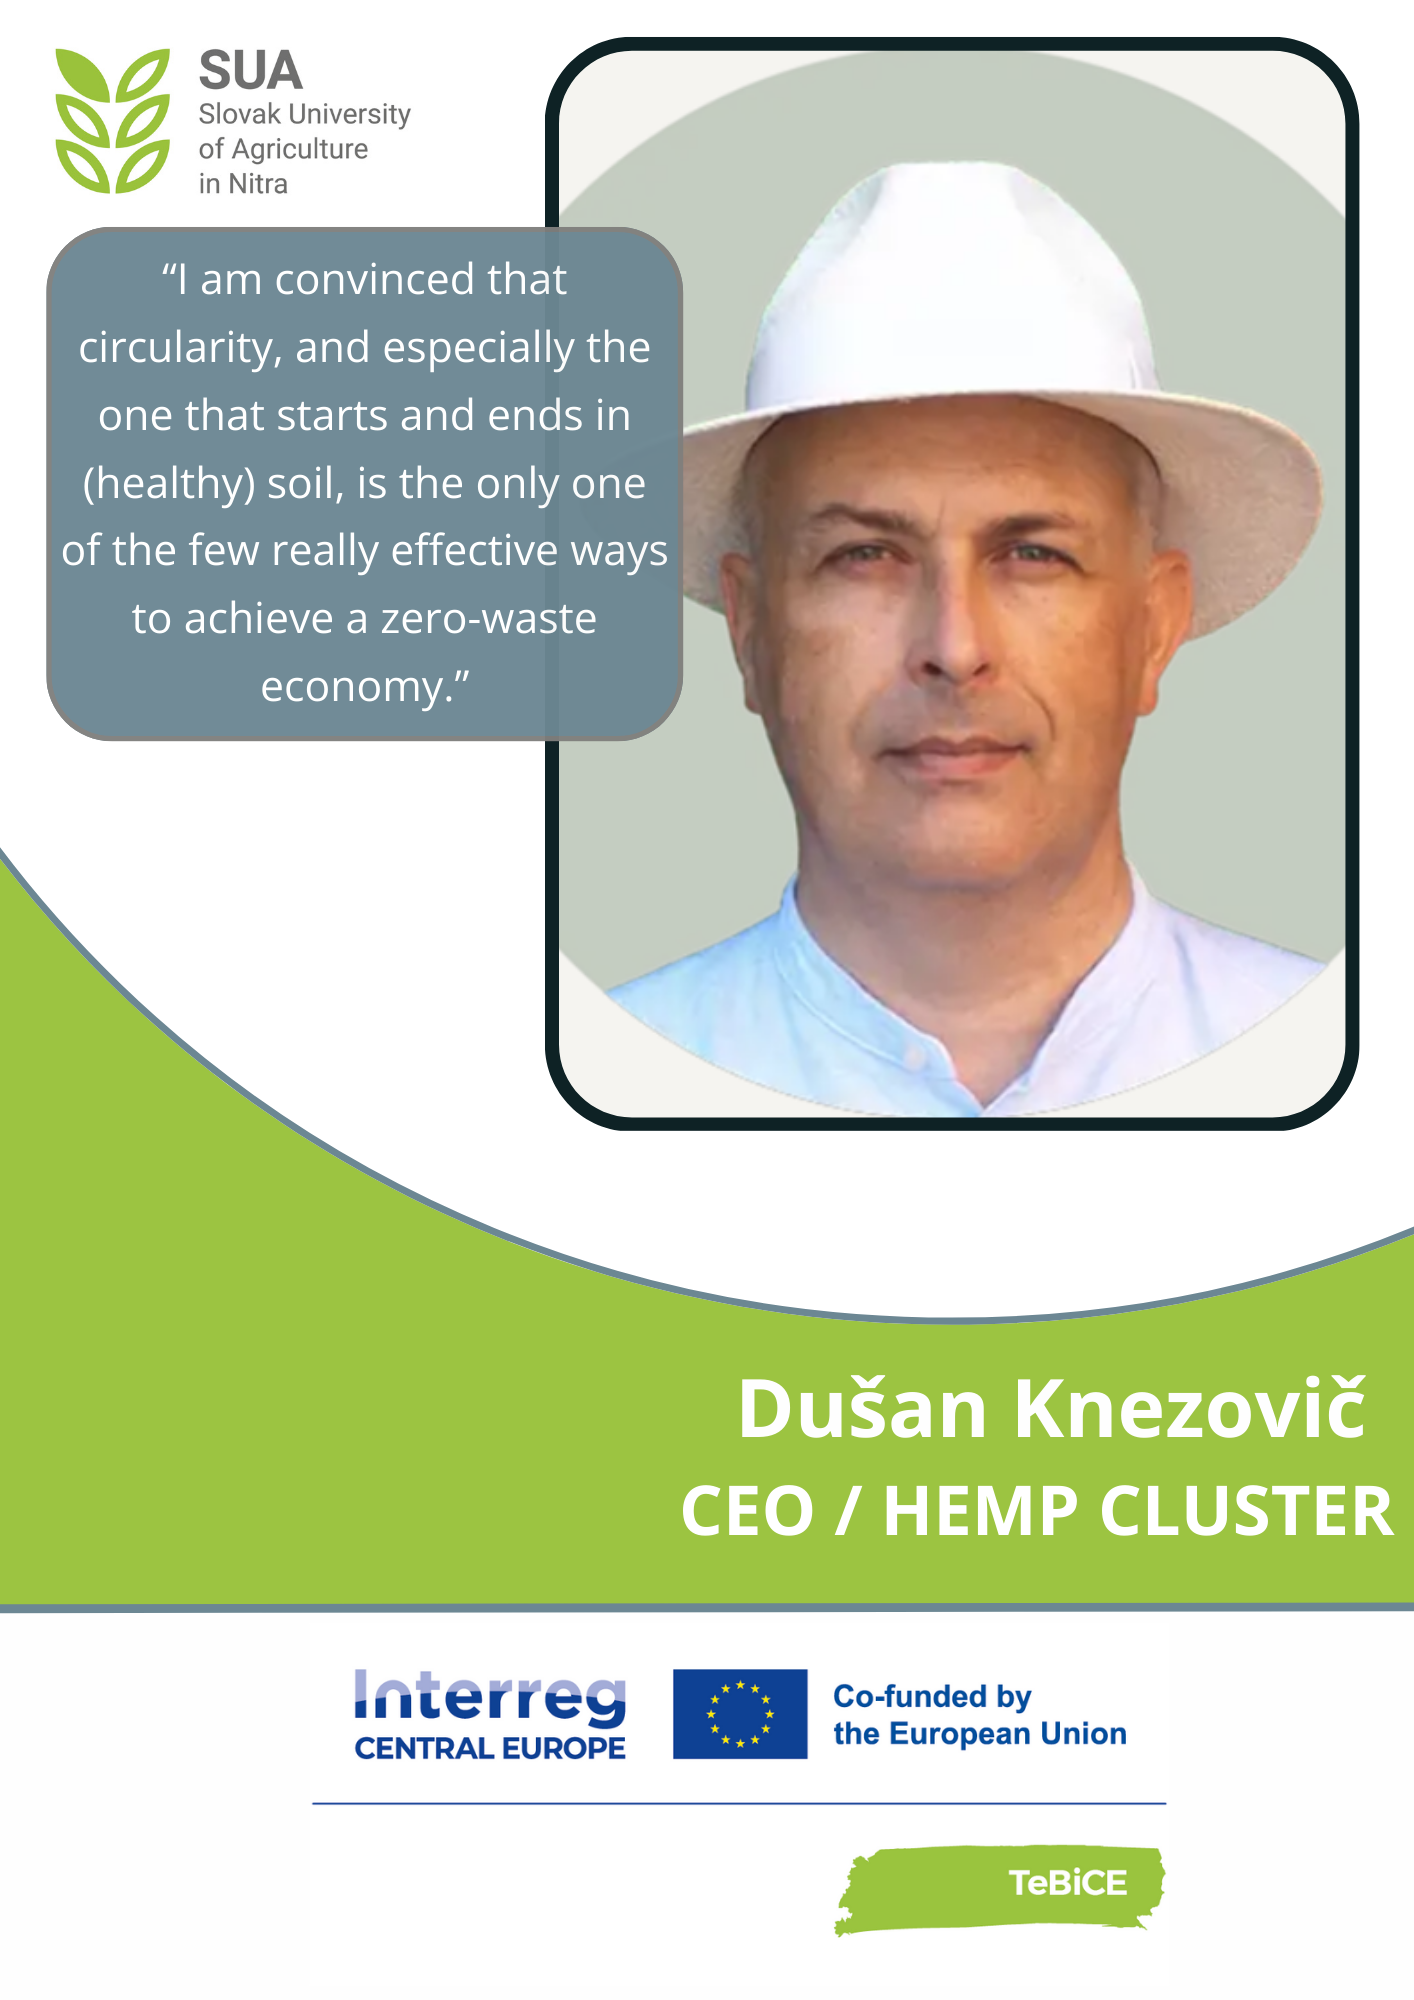 Expert interview with Dušan Knezovič from Slovak University of Agriculture in Nitra